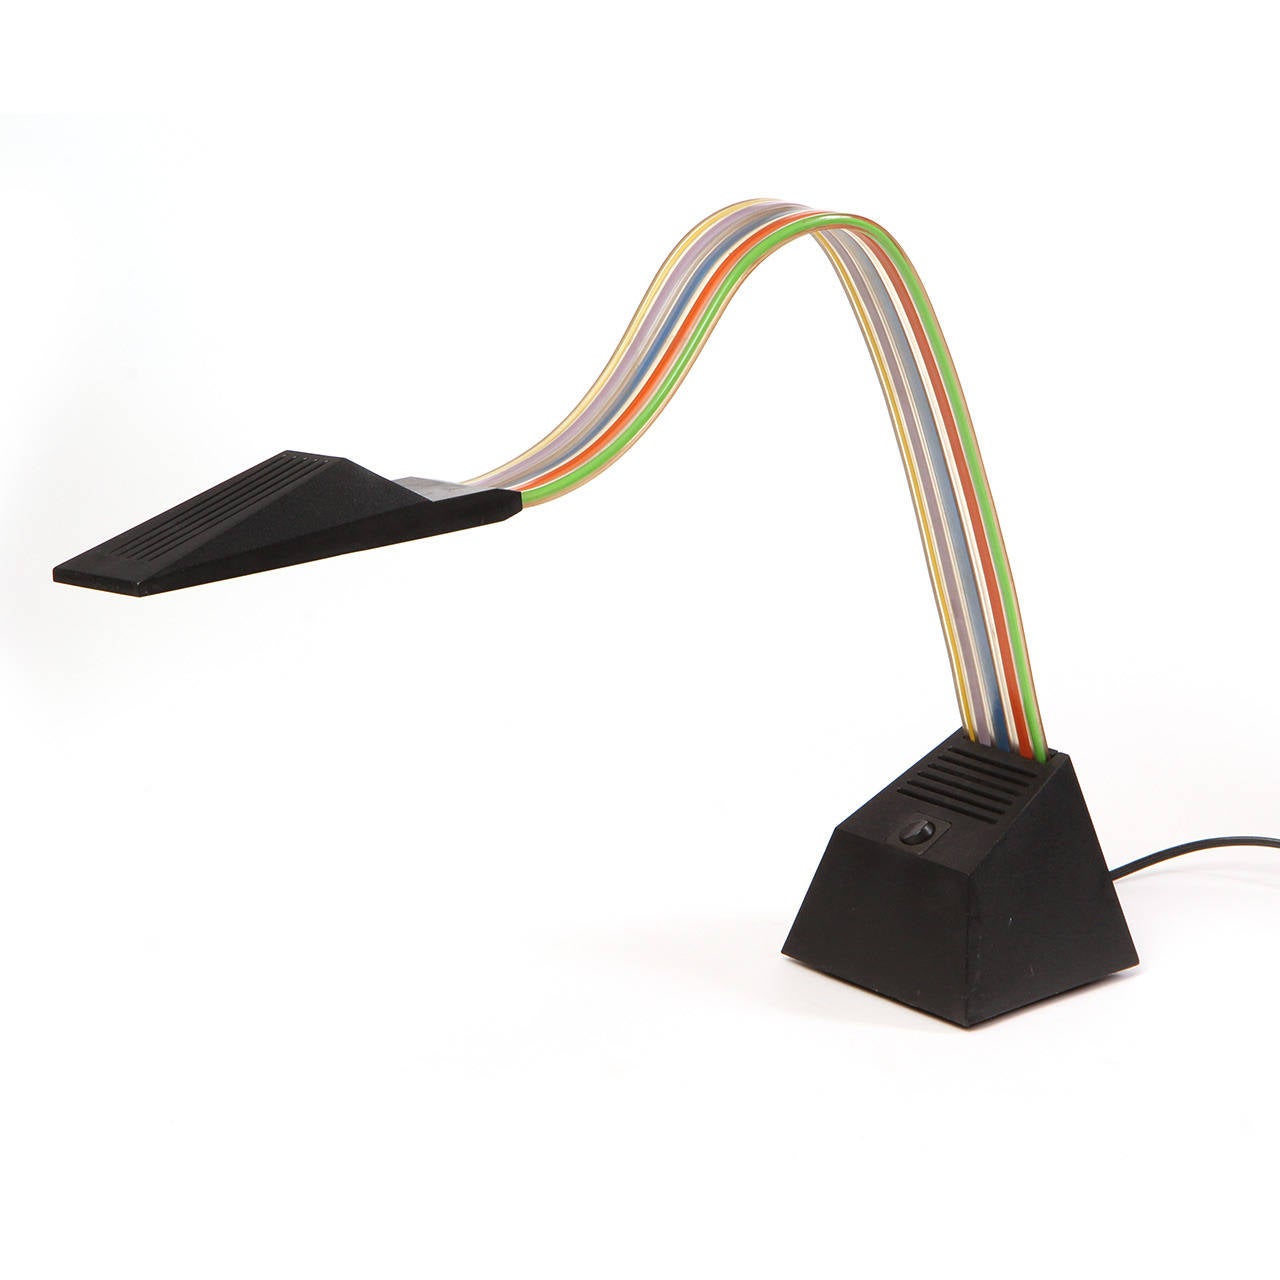 A sculptural, dramatic and unusual adjustable Nastro desk lamp having a flexible multicolored extruded pvc stem with electrical cabling rising from a polycarbonate weighted base.